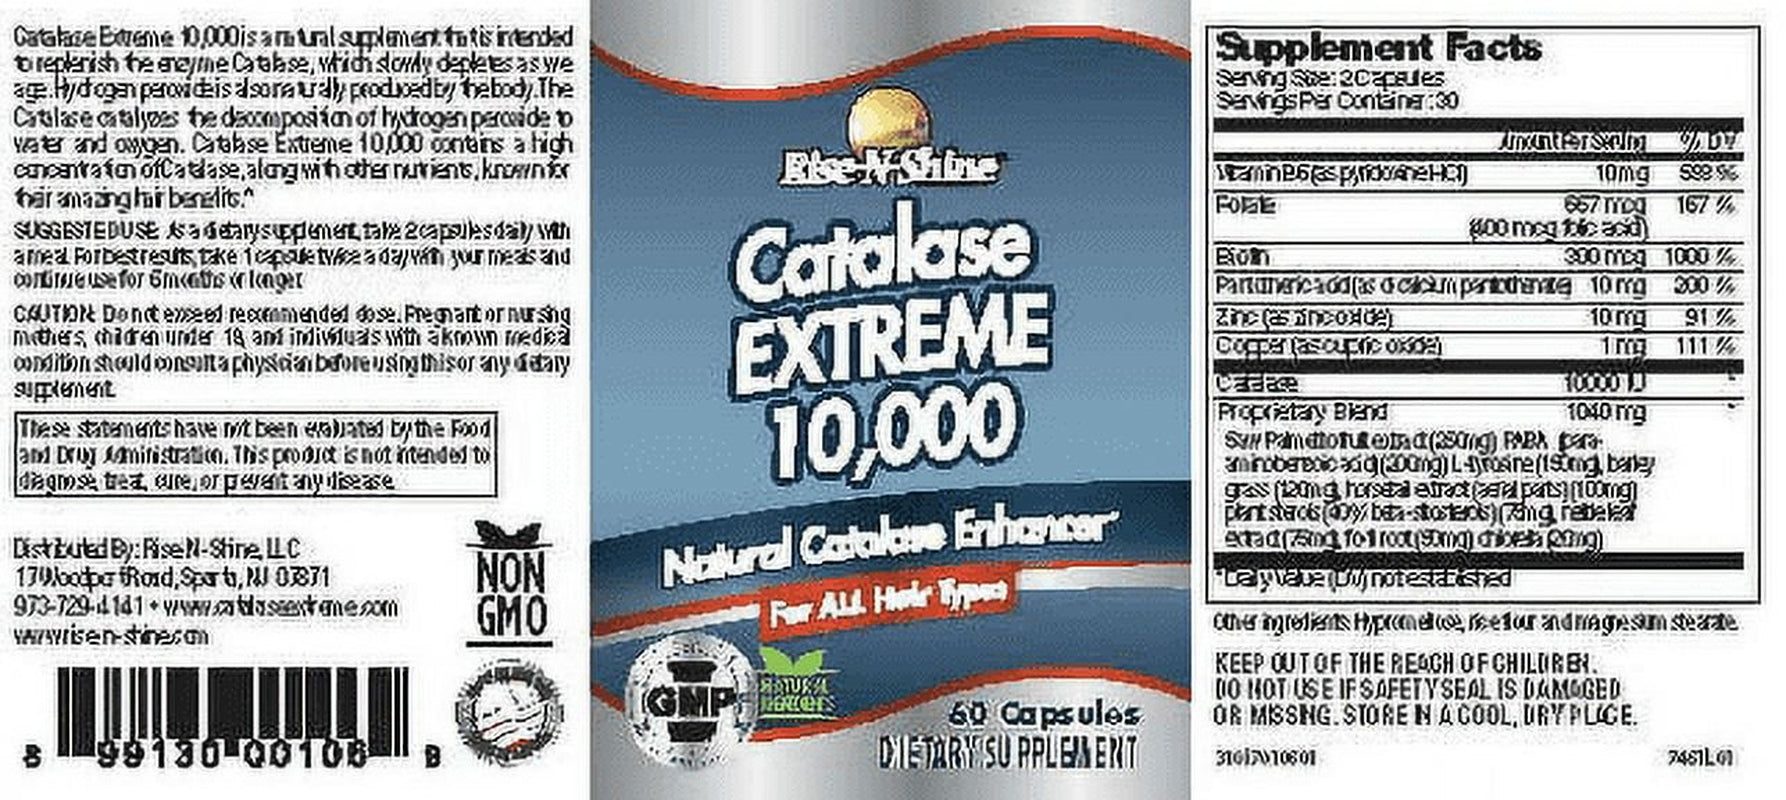 Rise-N-Shine Catalase Extreme 10,000 IU with Saw Palmetto, Biotin, Unisex Hair Supplement, 3 Pack